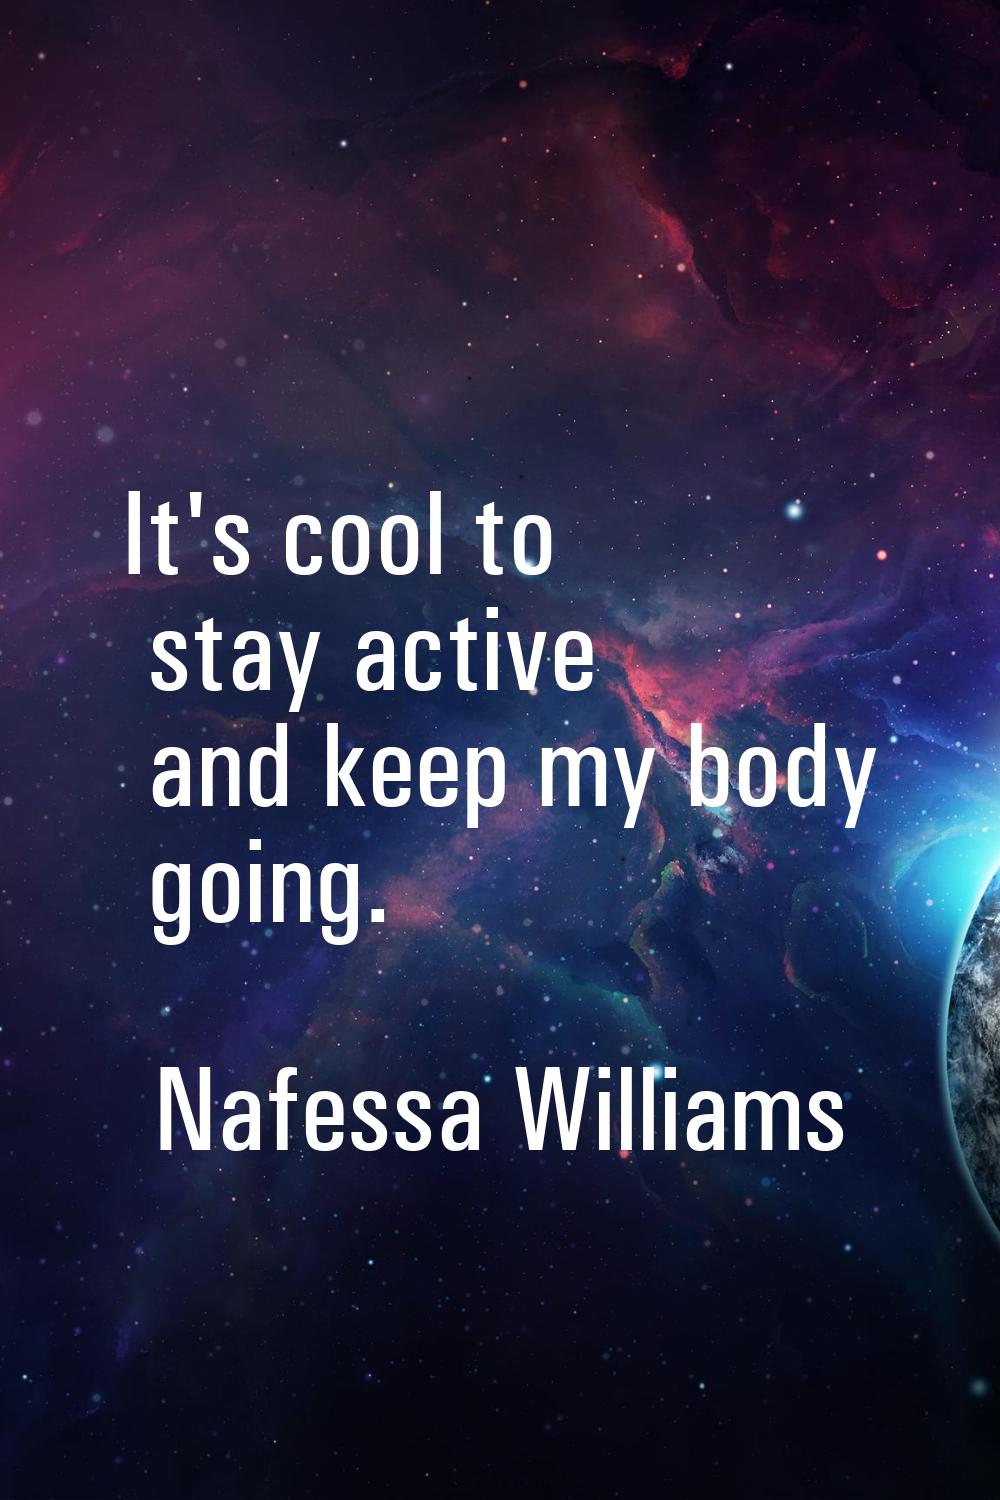 It's cool to stay active and keep my body going.